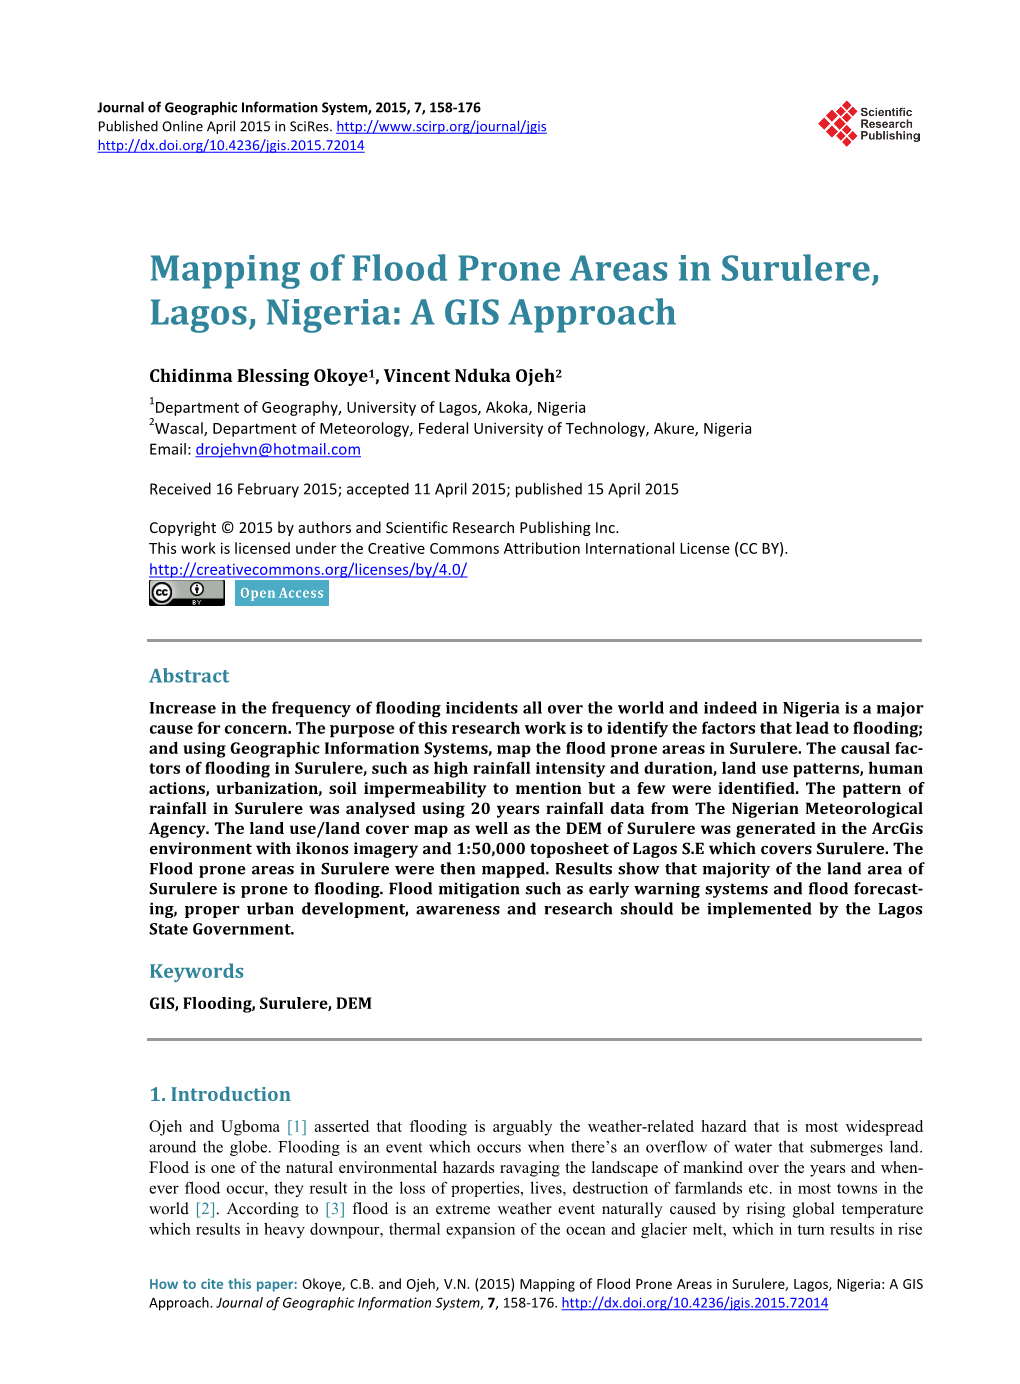 Mapping of Flood Prone Areas in Surulere, Lagos, Nigeria: a GIS Approach